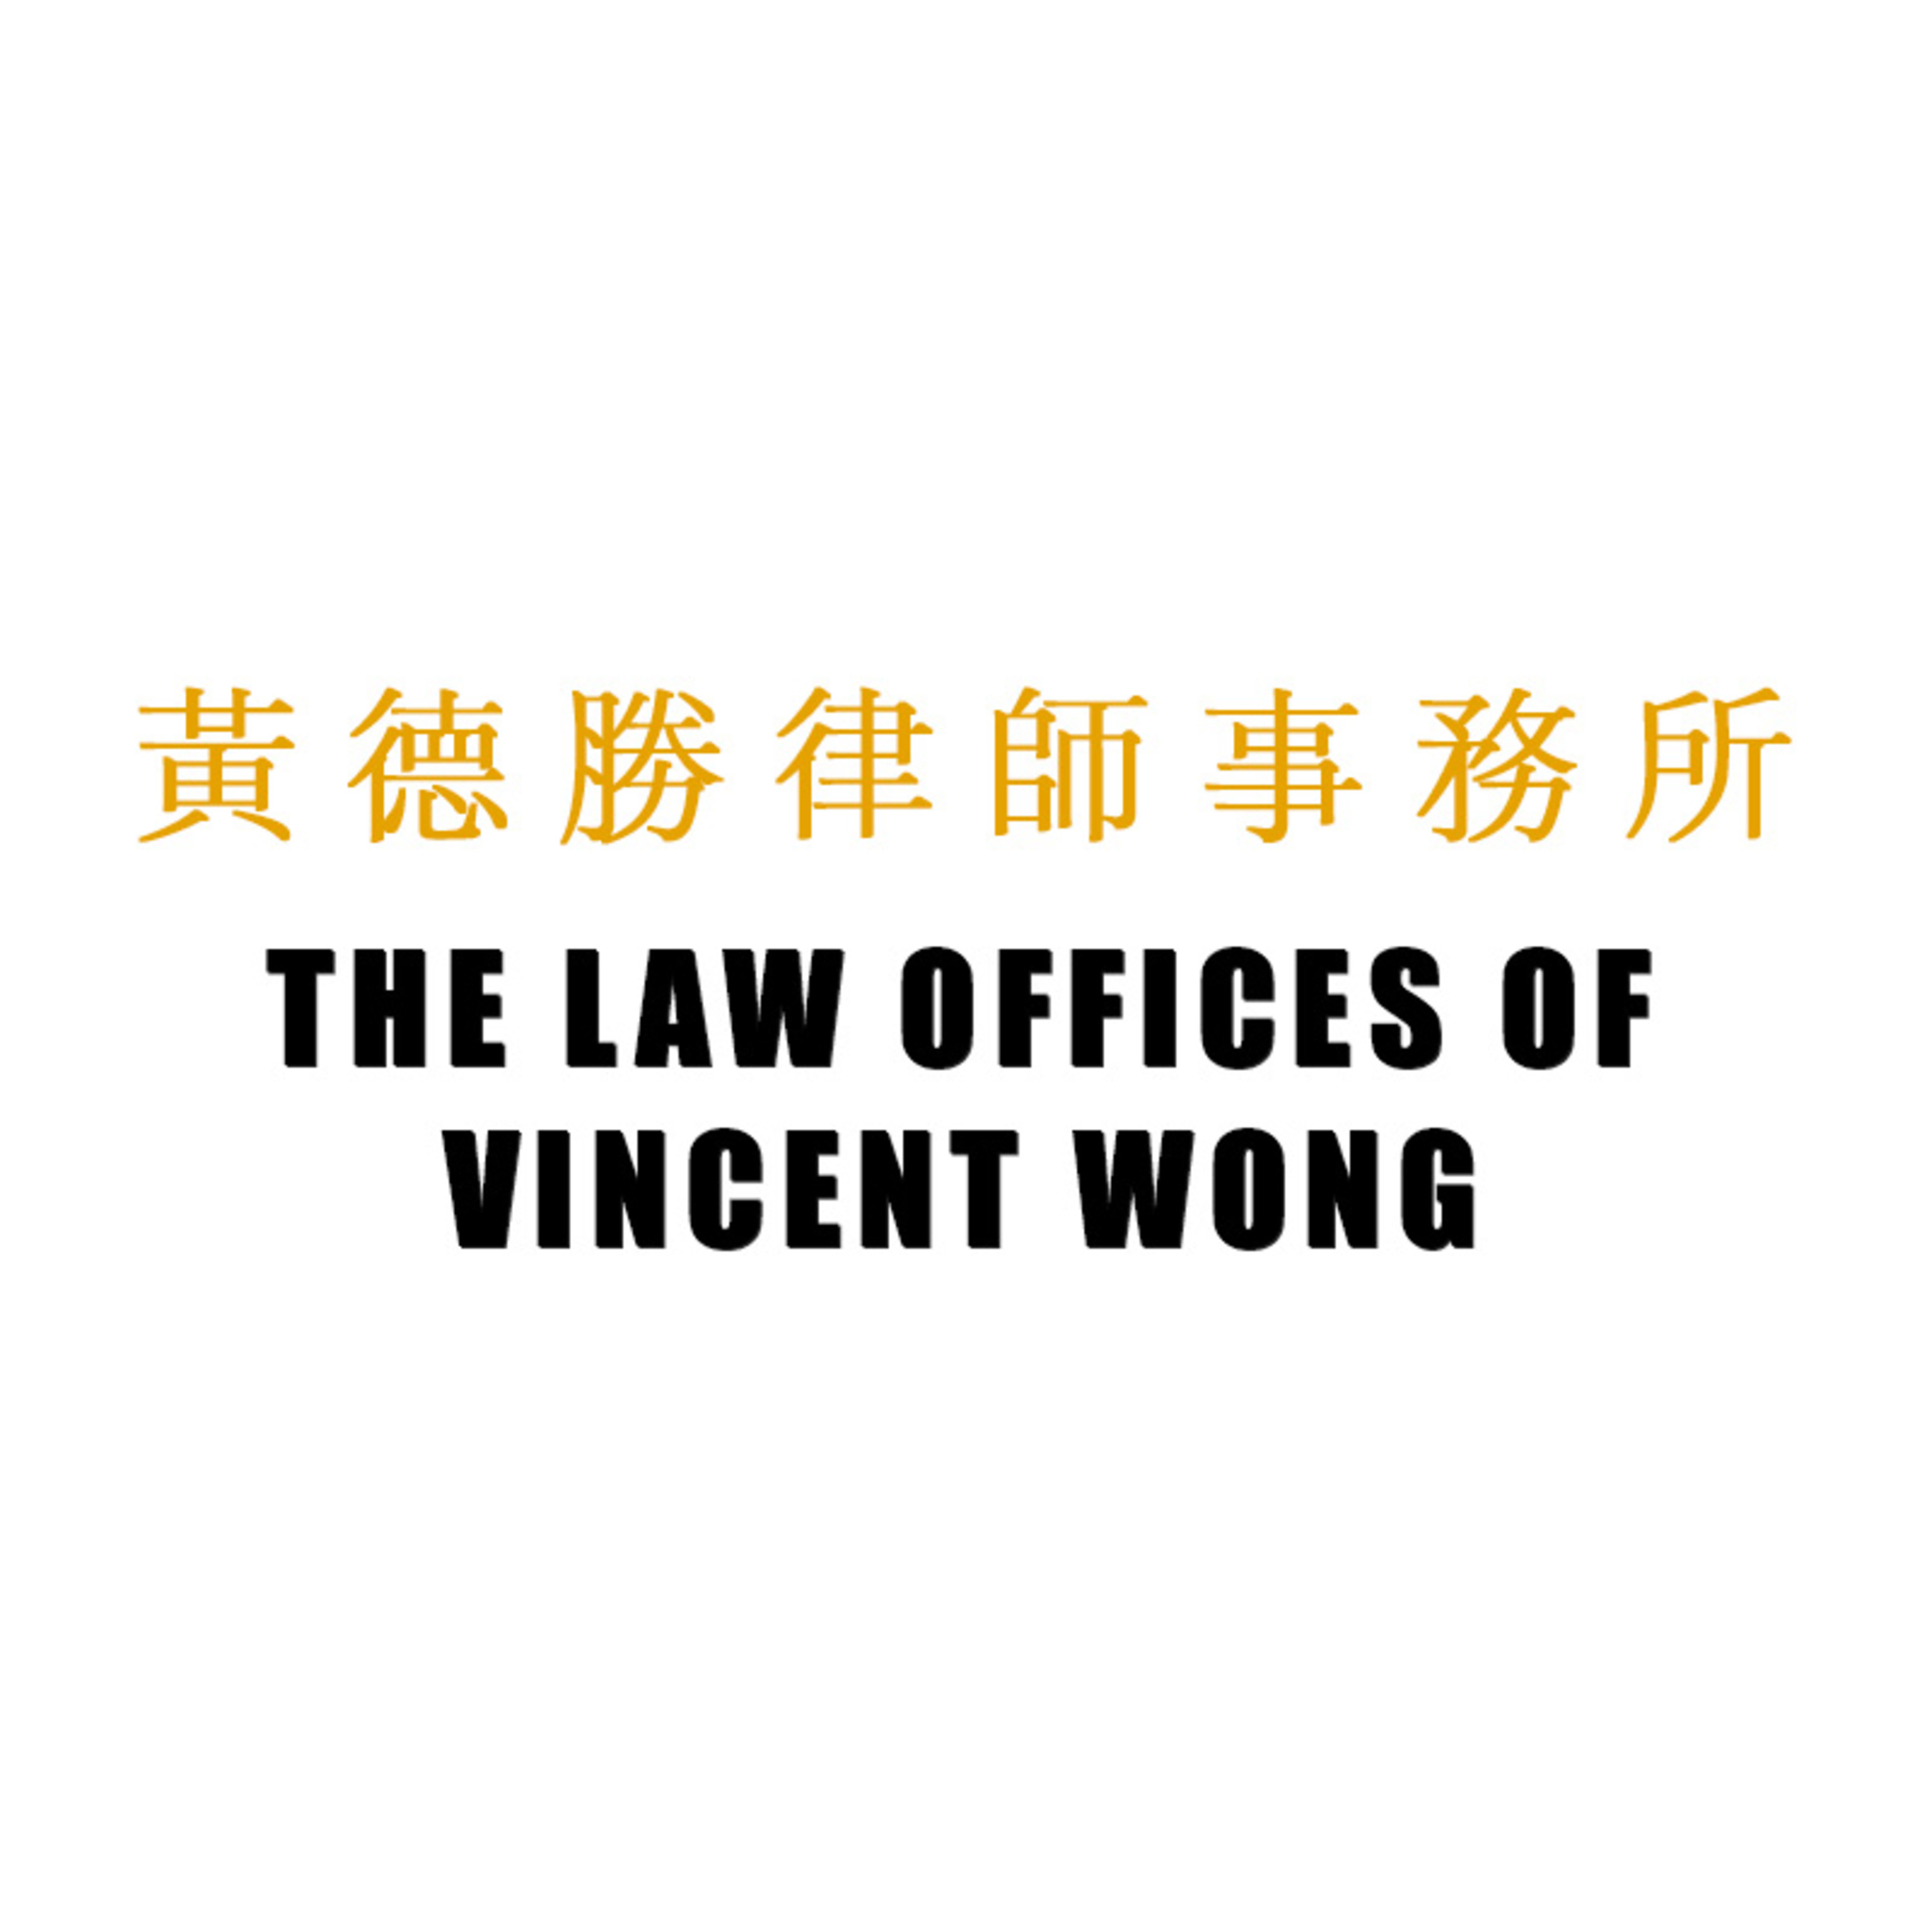 Law Offices of Vincent Wong